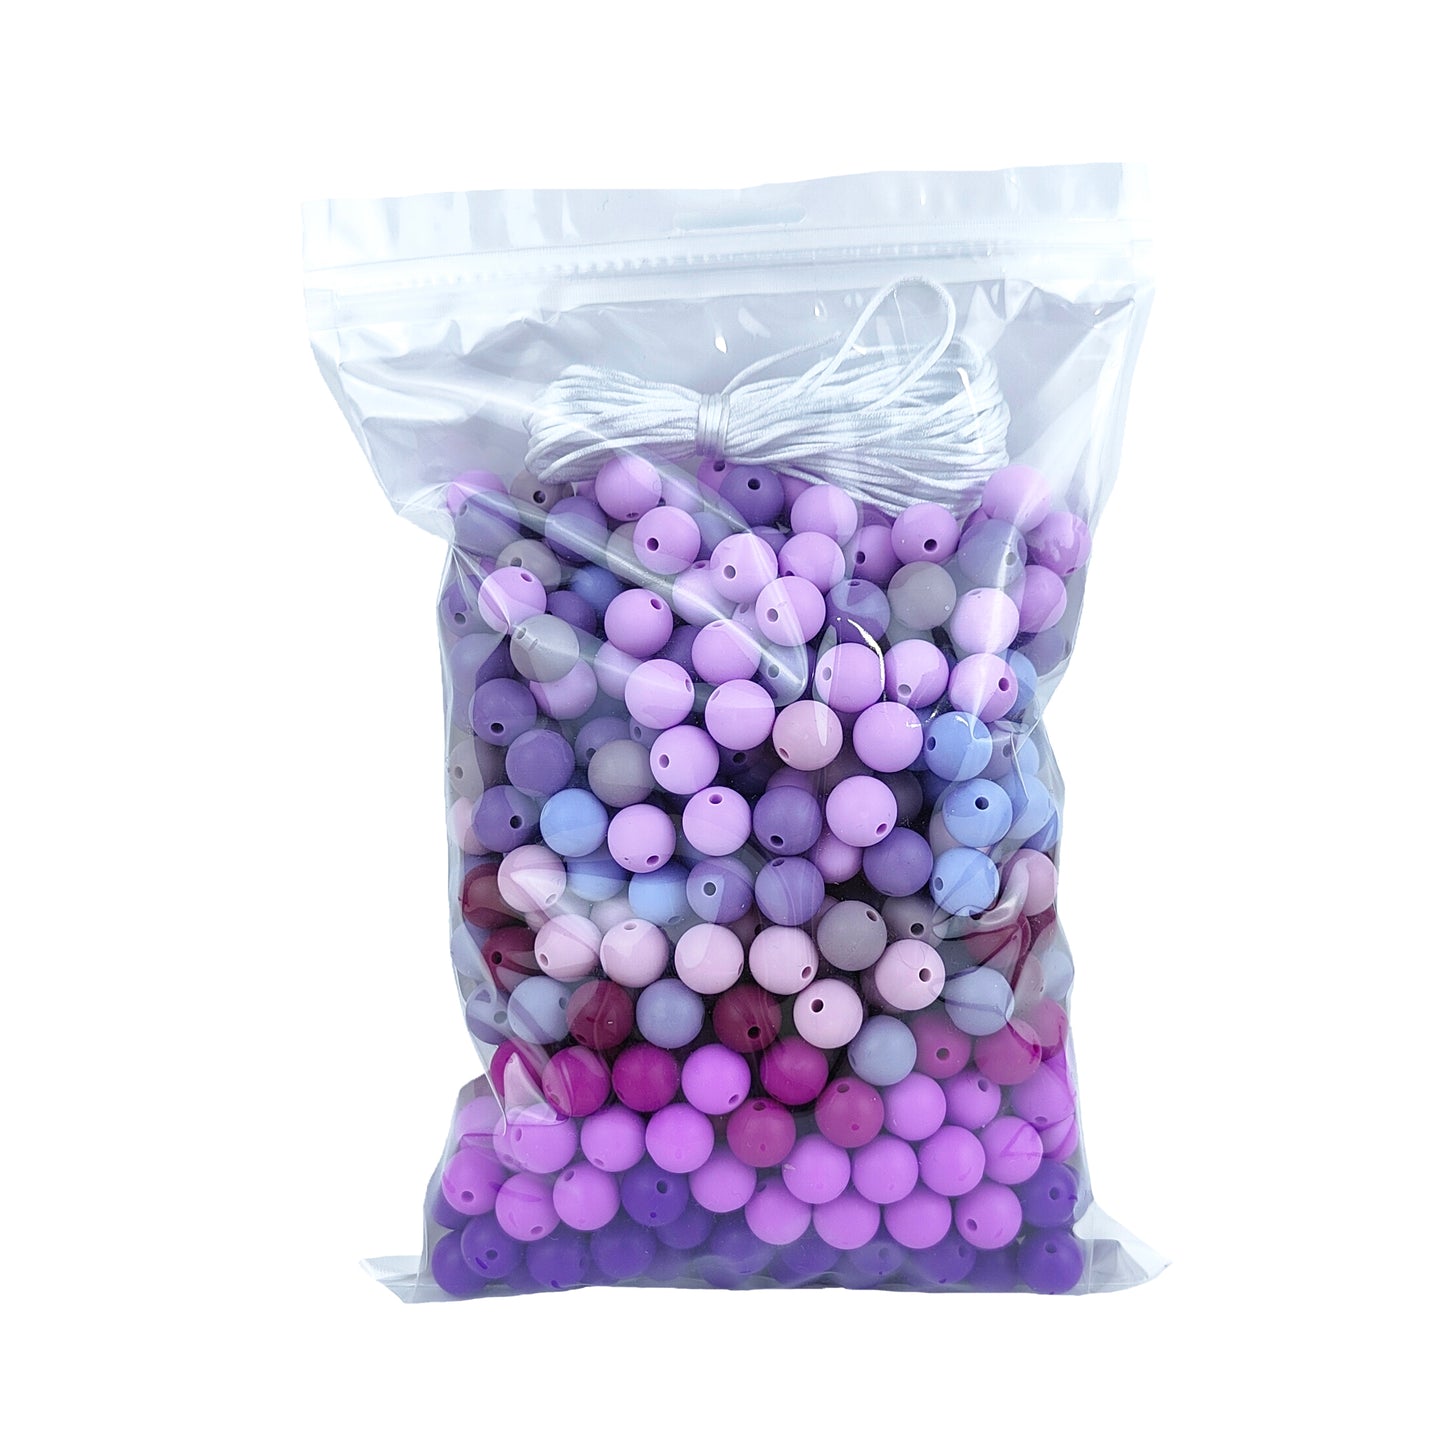 500Pcs 12mm Round Mixed Colors Silicone Beads